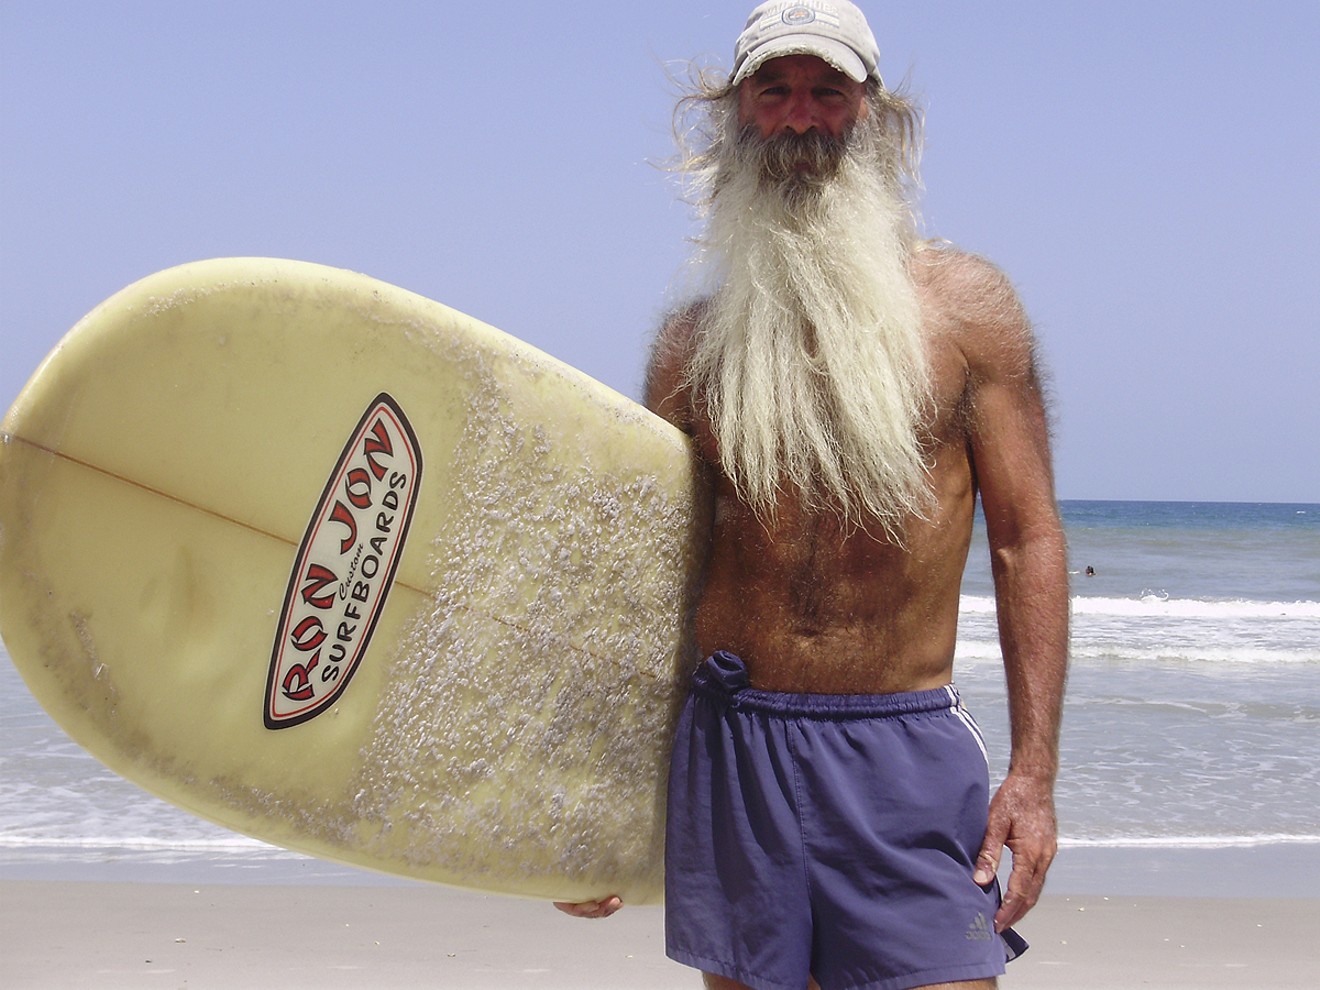 Dana Brown surfed every day except Saturday, based on his strict interpretation of the Bible.